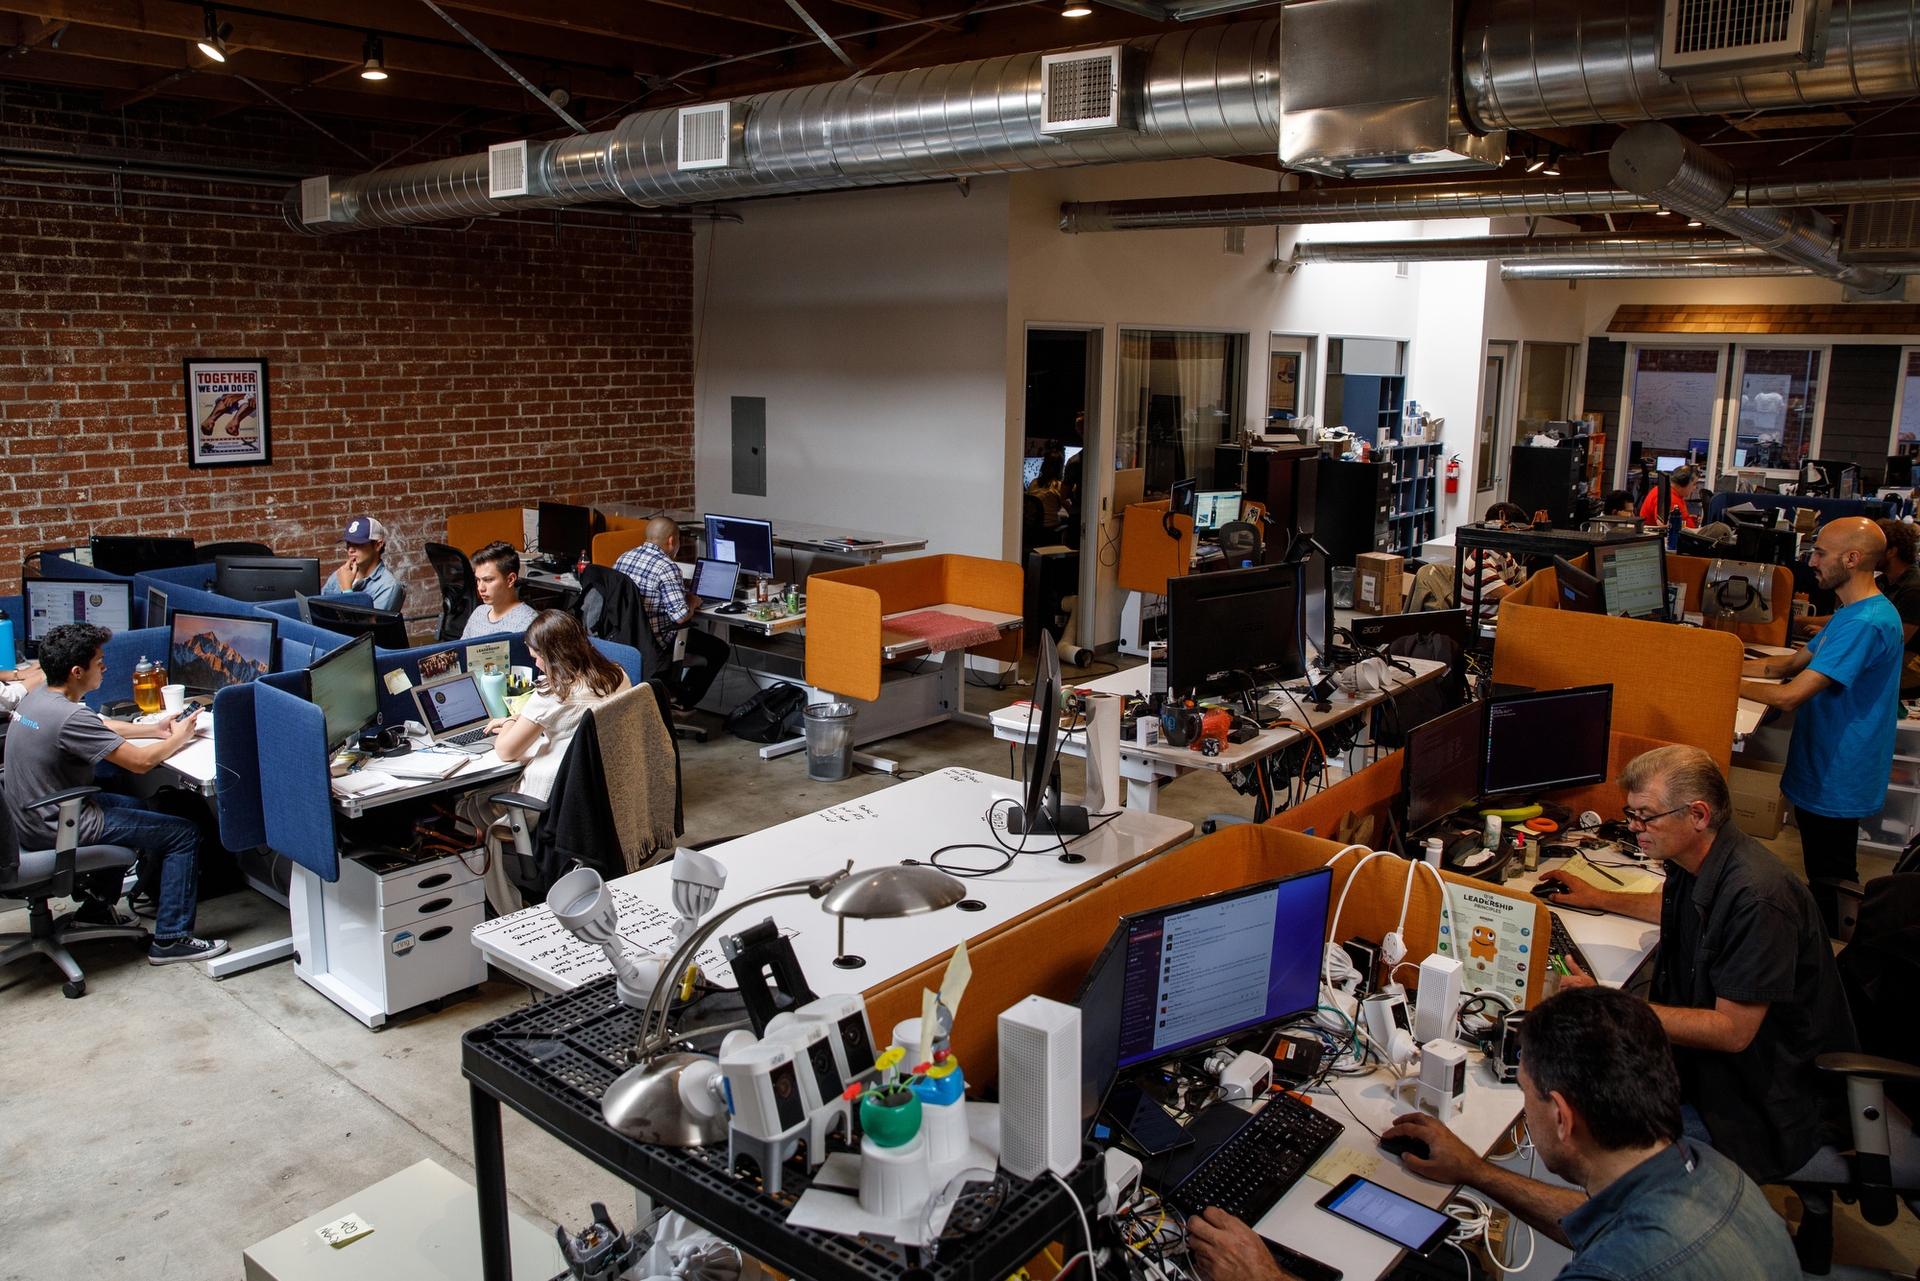 Employees sit at long tables with computers at Ring headquarters in Santa Monica, CA. The walls are brick. 